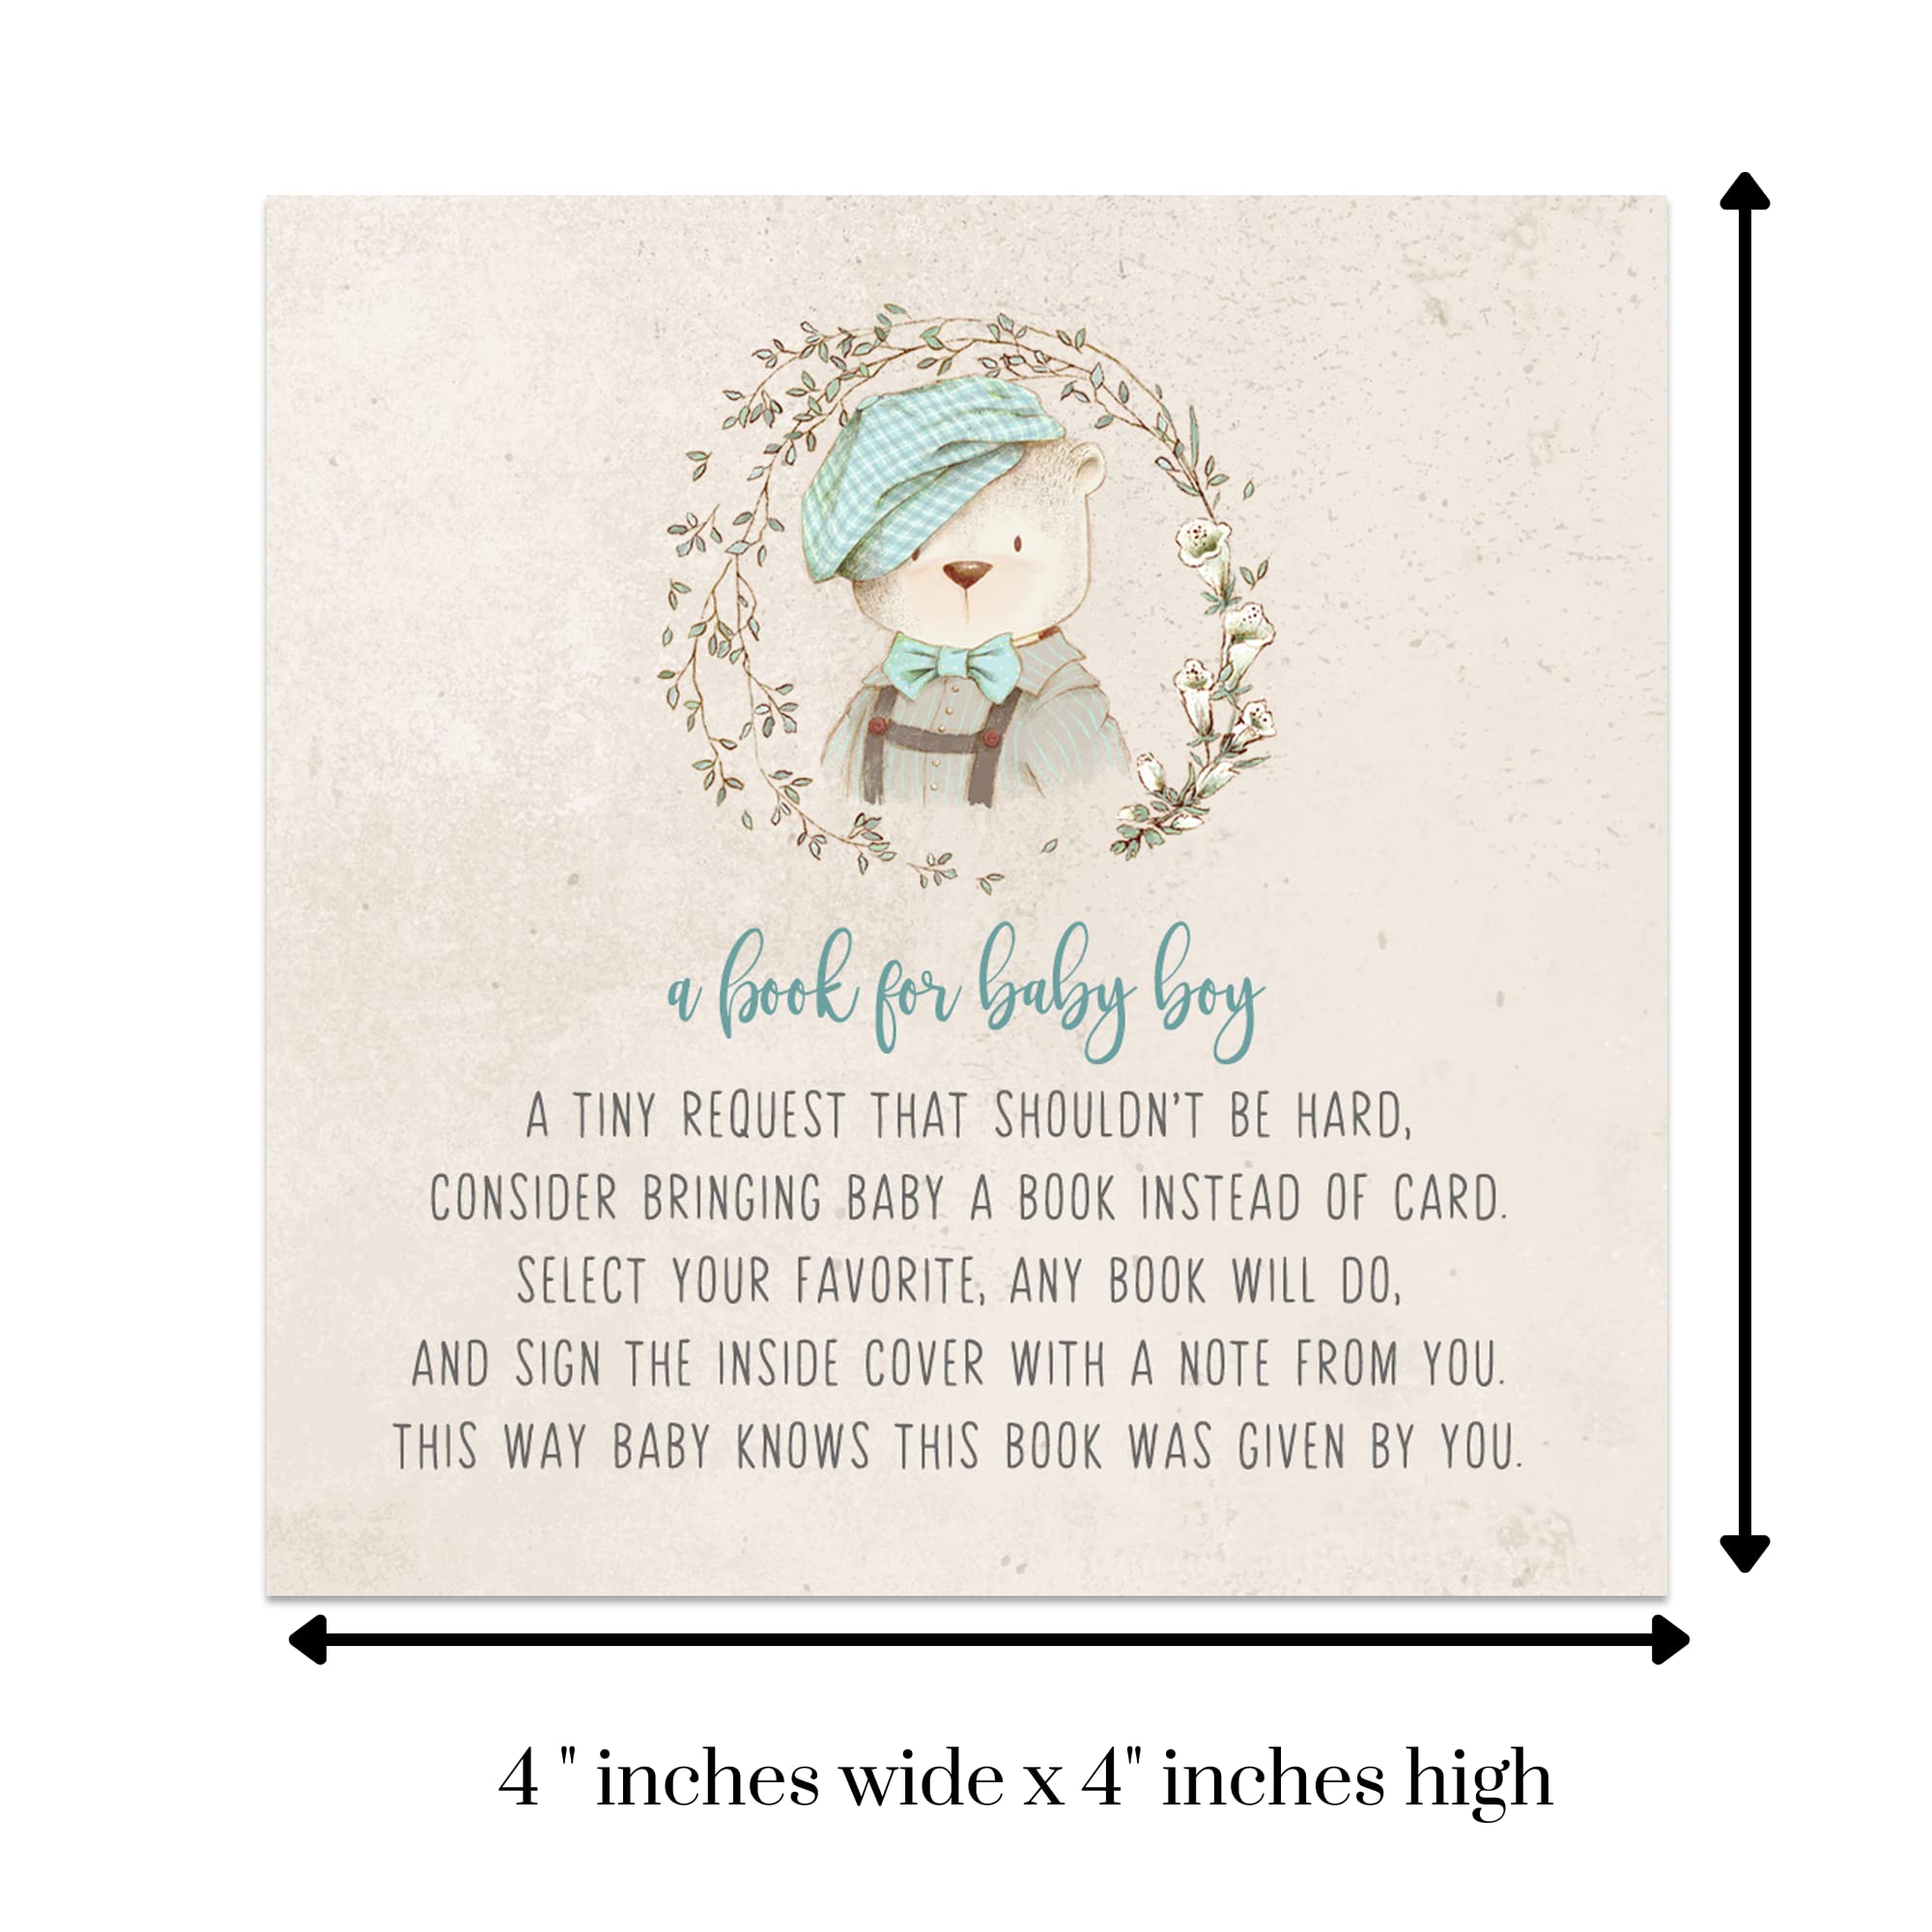 Paper Clever Party Teddy Bear Bring a Book Cards for Baby Shower (25 Pack) Boys Invitation Insert for Bow Tie Parties – Rustic Greenery Theme Blue – 4x4 Printed Card Set